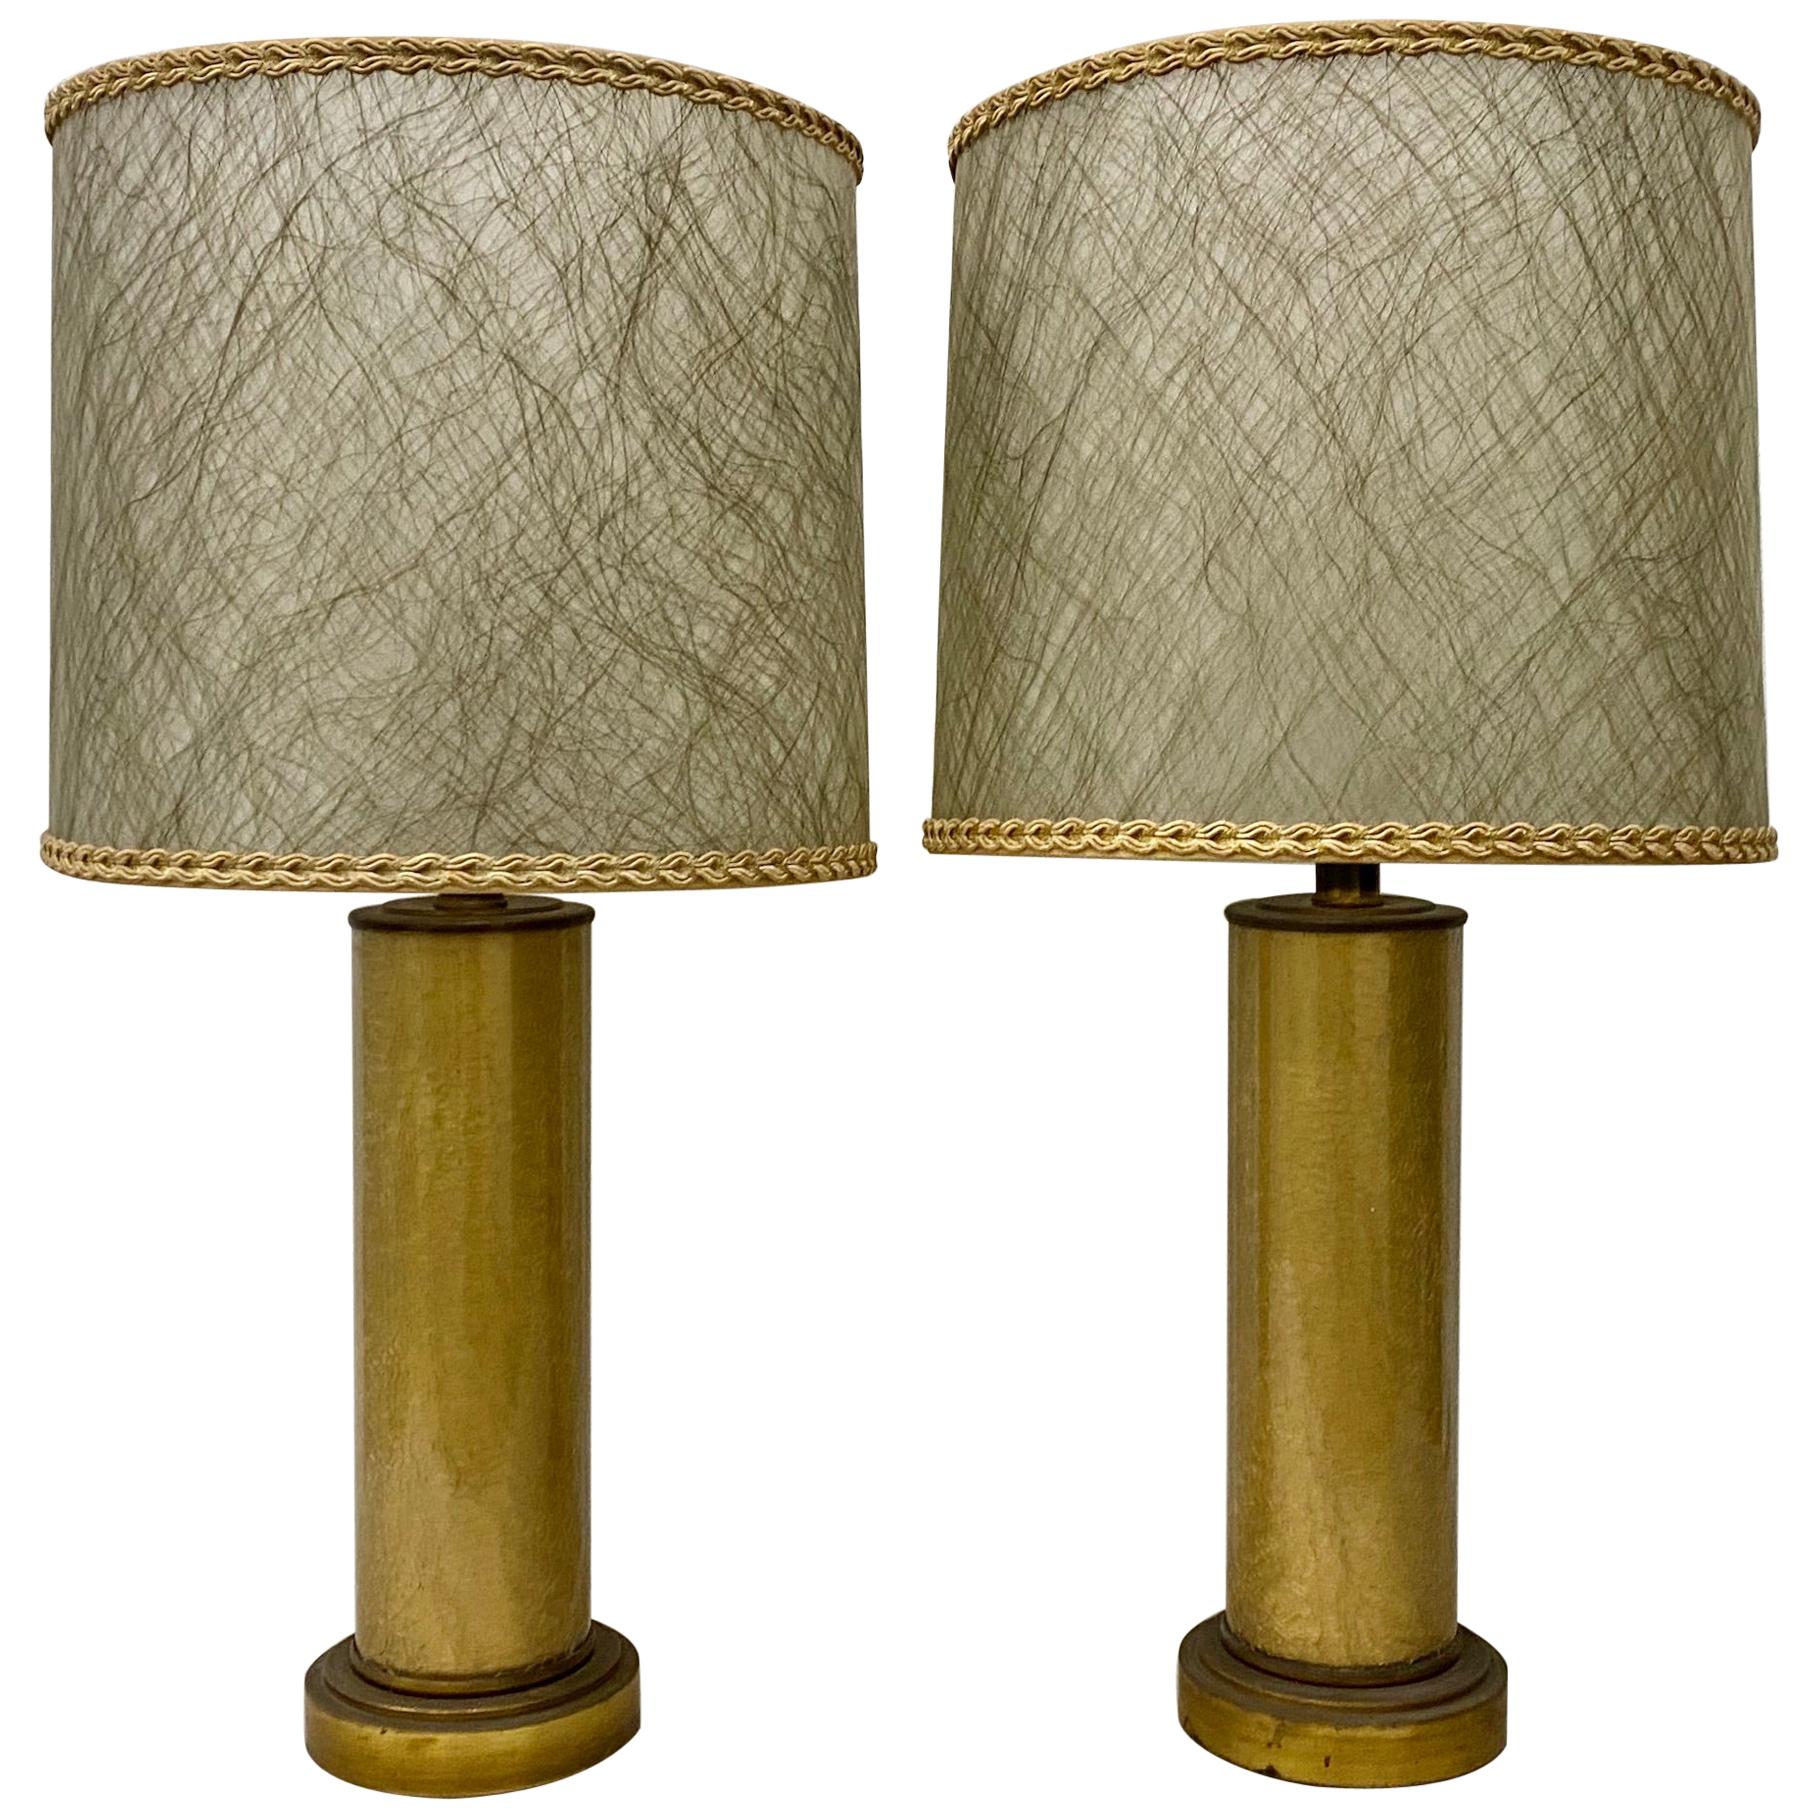 Paul Hanson Crackled 'Foil' Glass Lamps with Original Shades, circa 1950